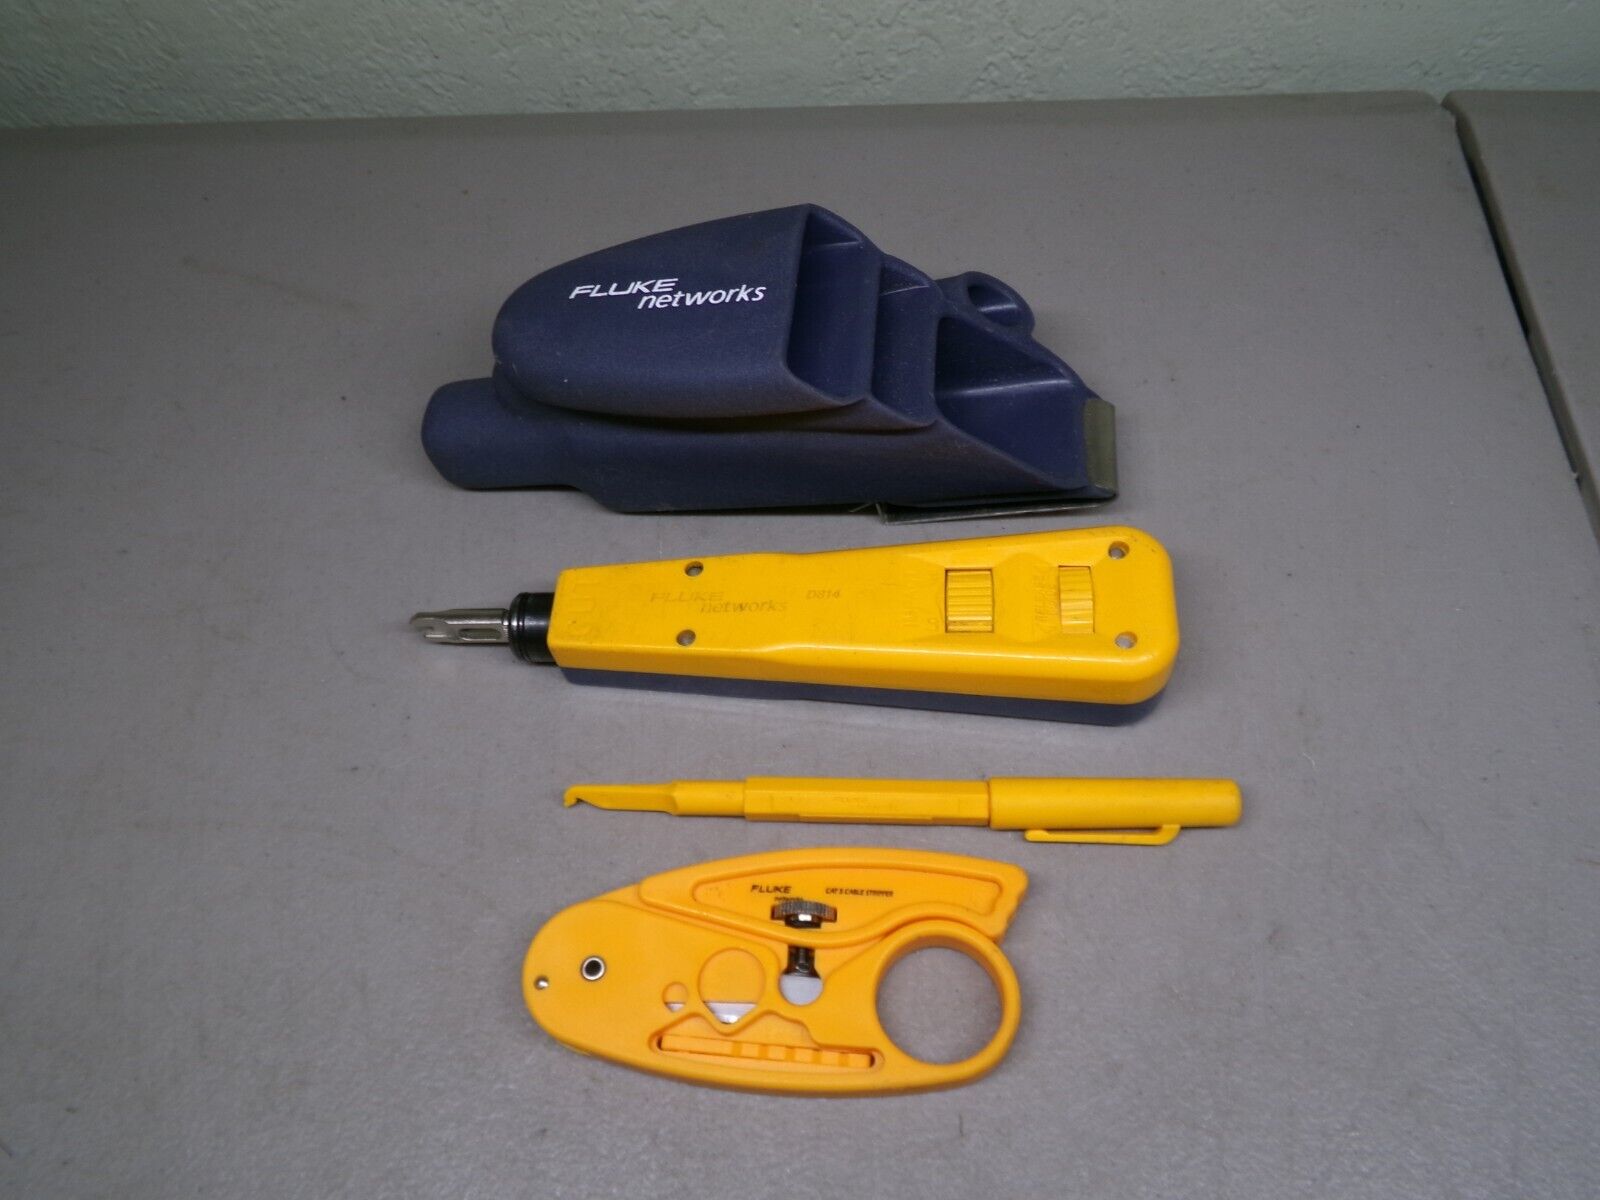 FLUKE NETWORKS D814 IMPACT PUNCHDOWN TOOL SNIPS CUTTER W/CARRY POUCH